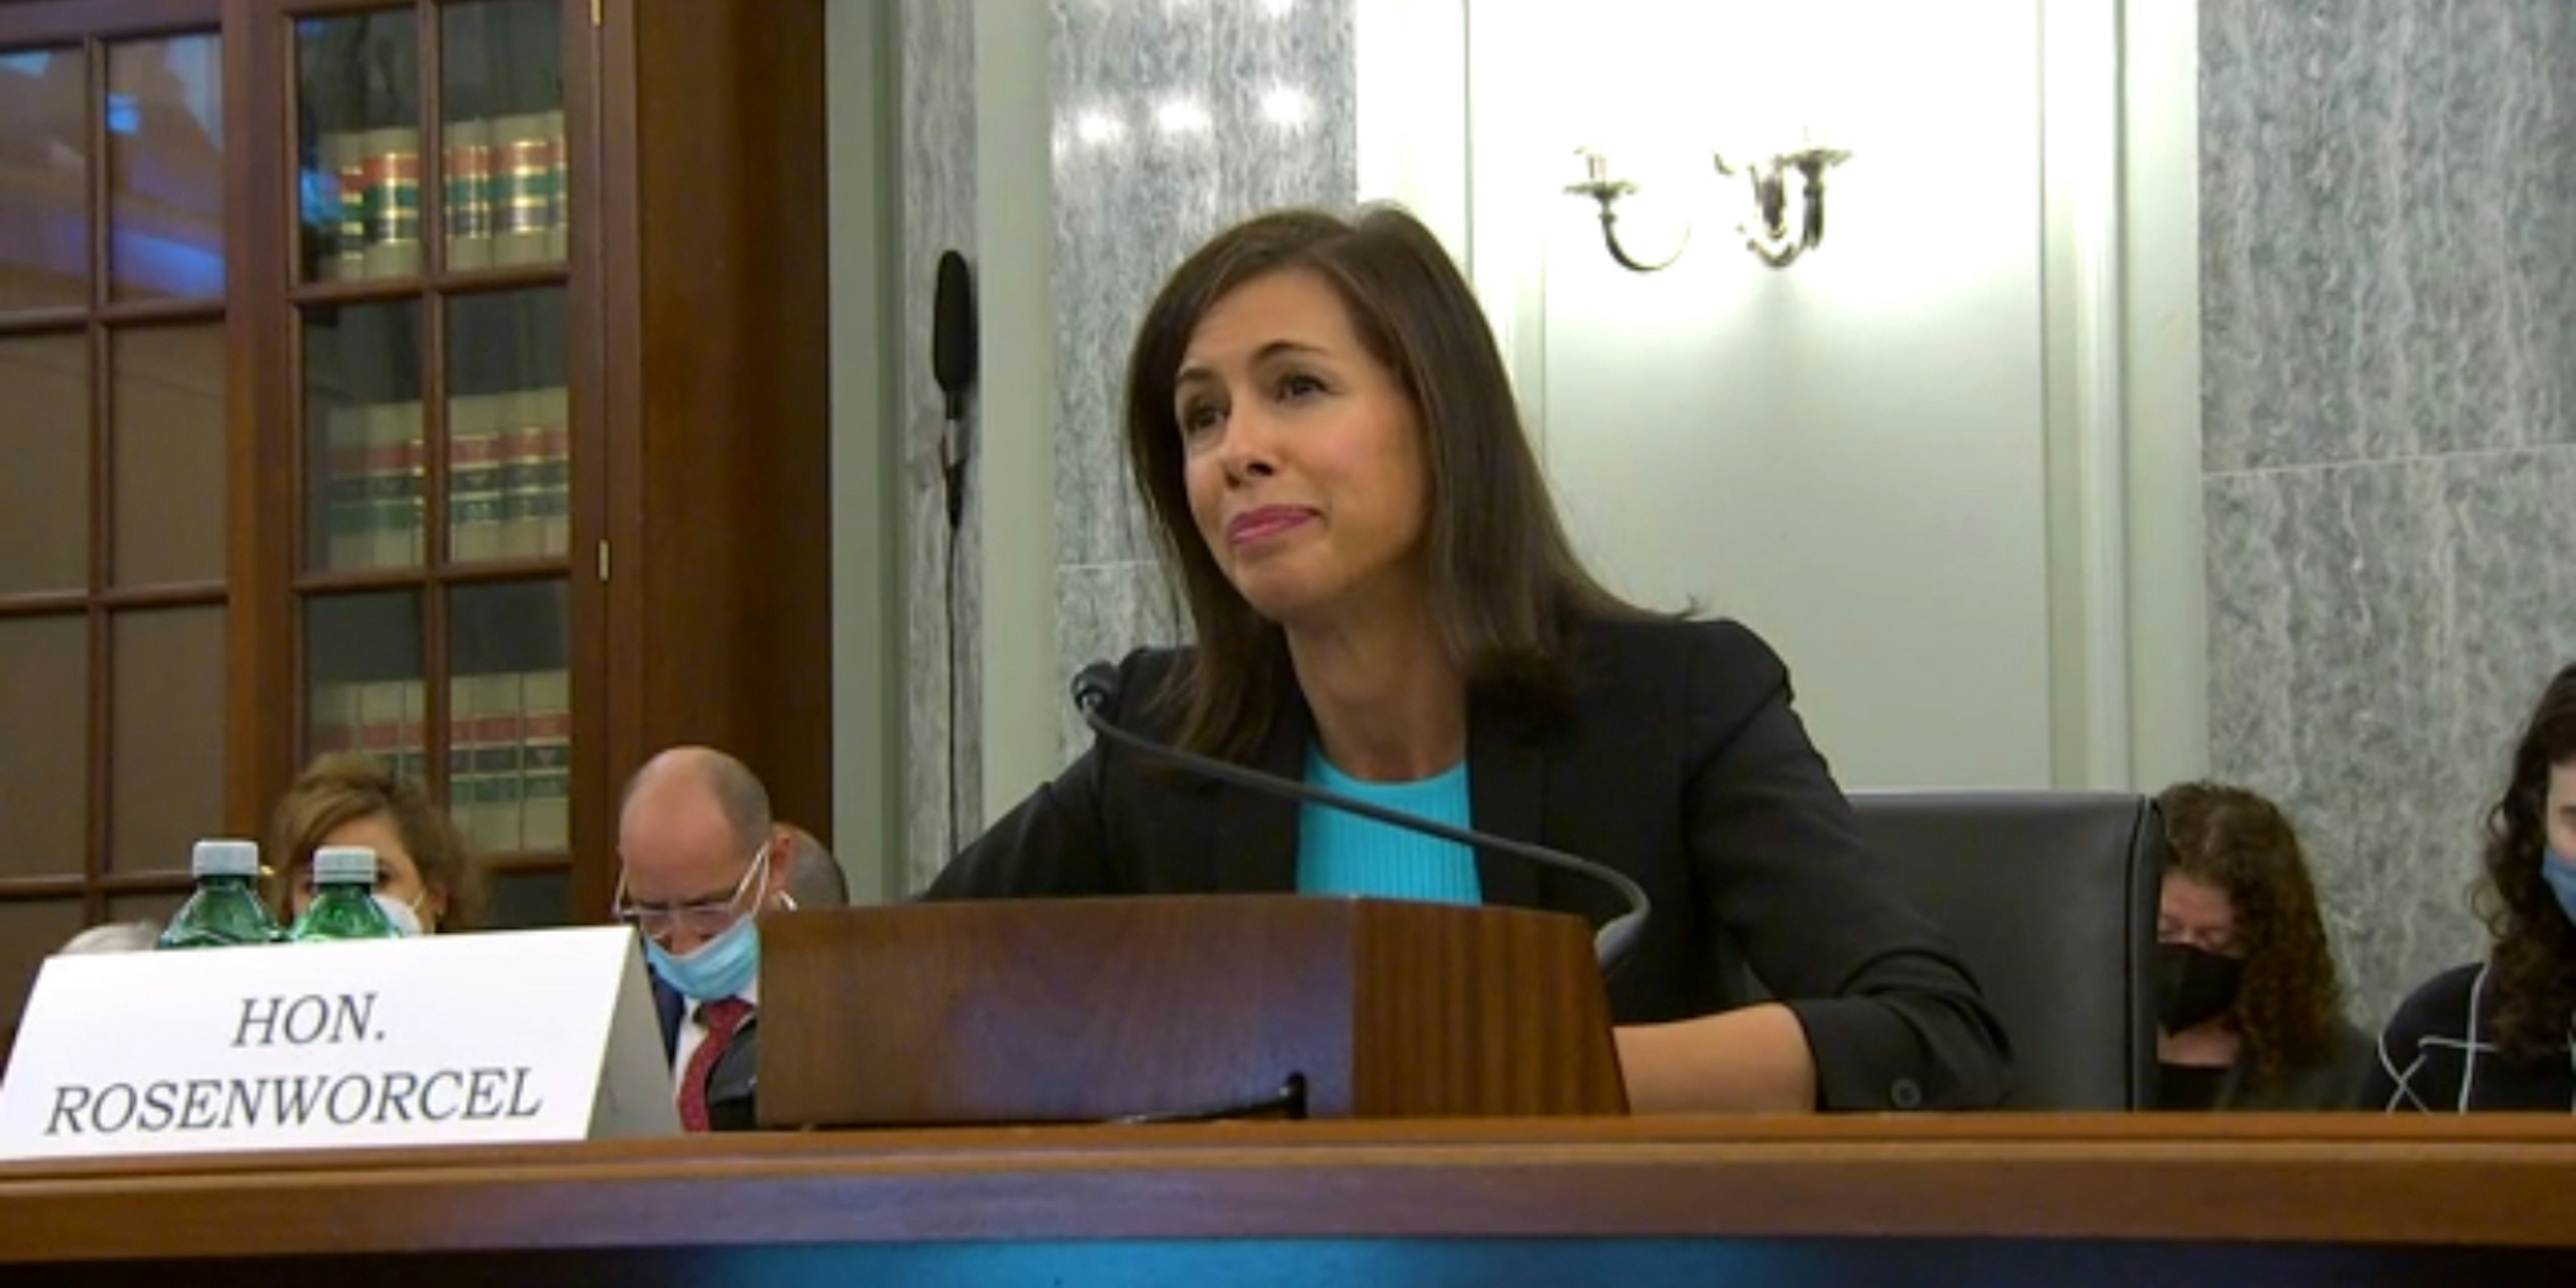 FCC Chairwoman Jessica Rosenworcel at a confirmation hearing in the Senate on Wednesday.